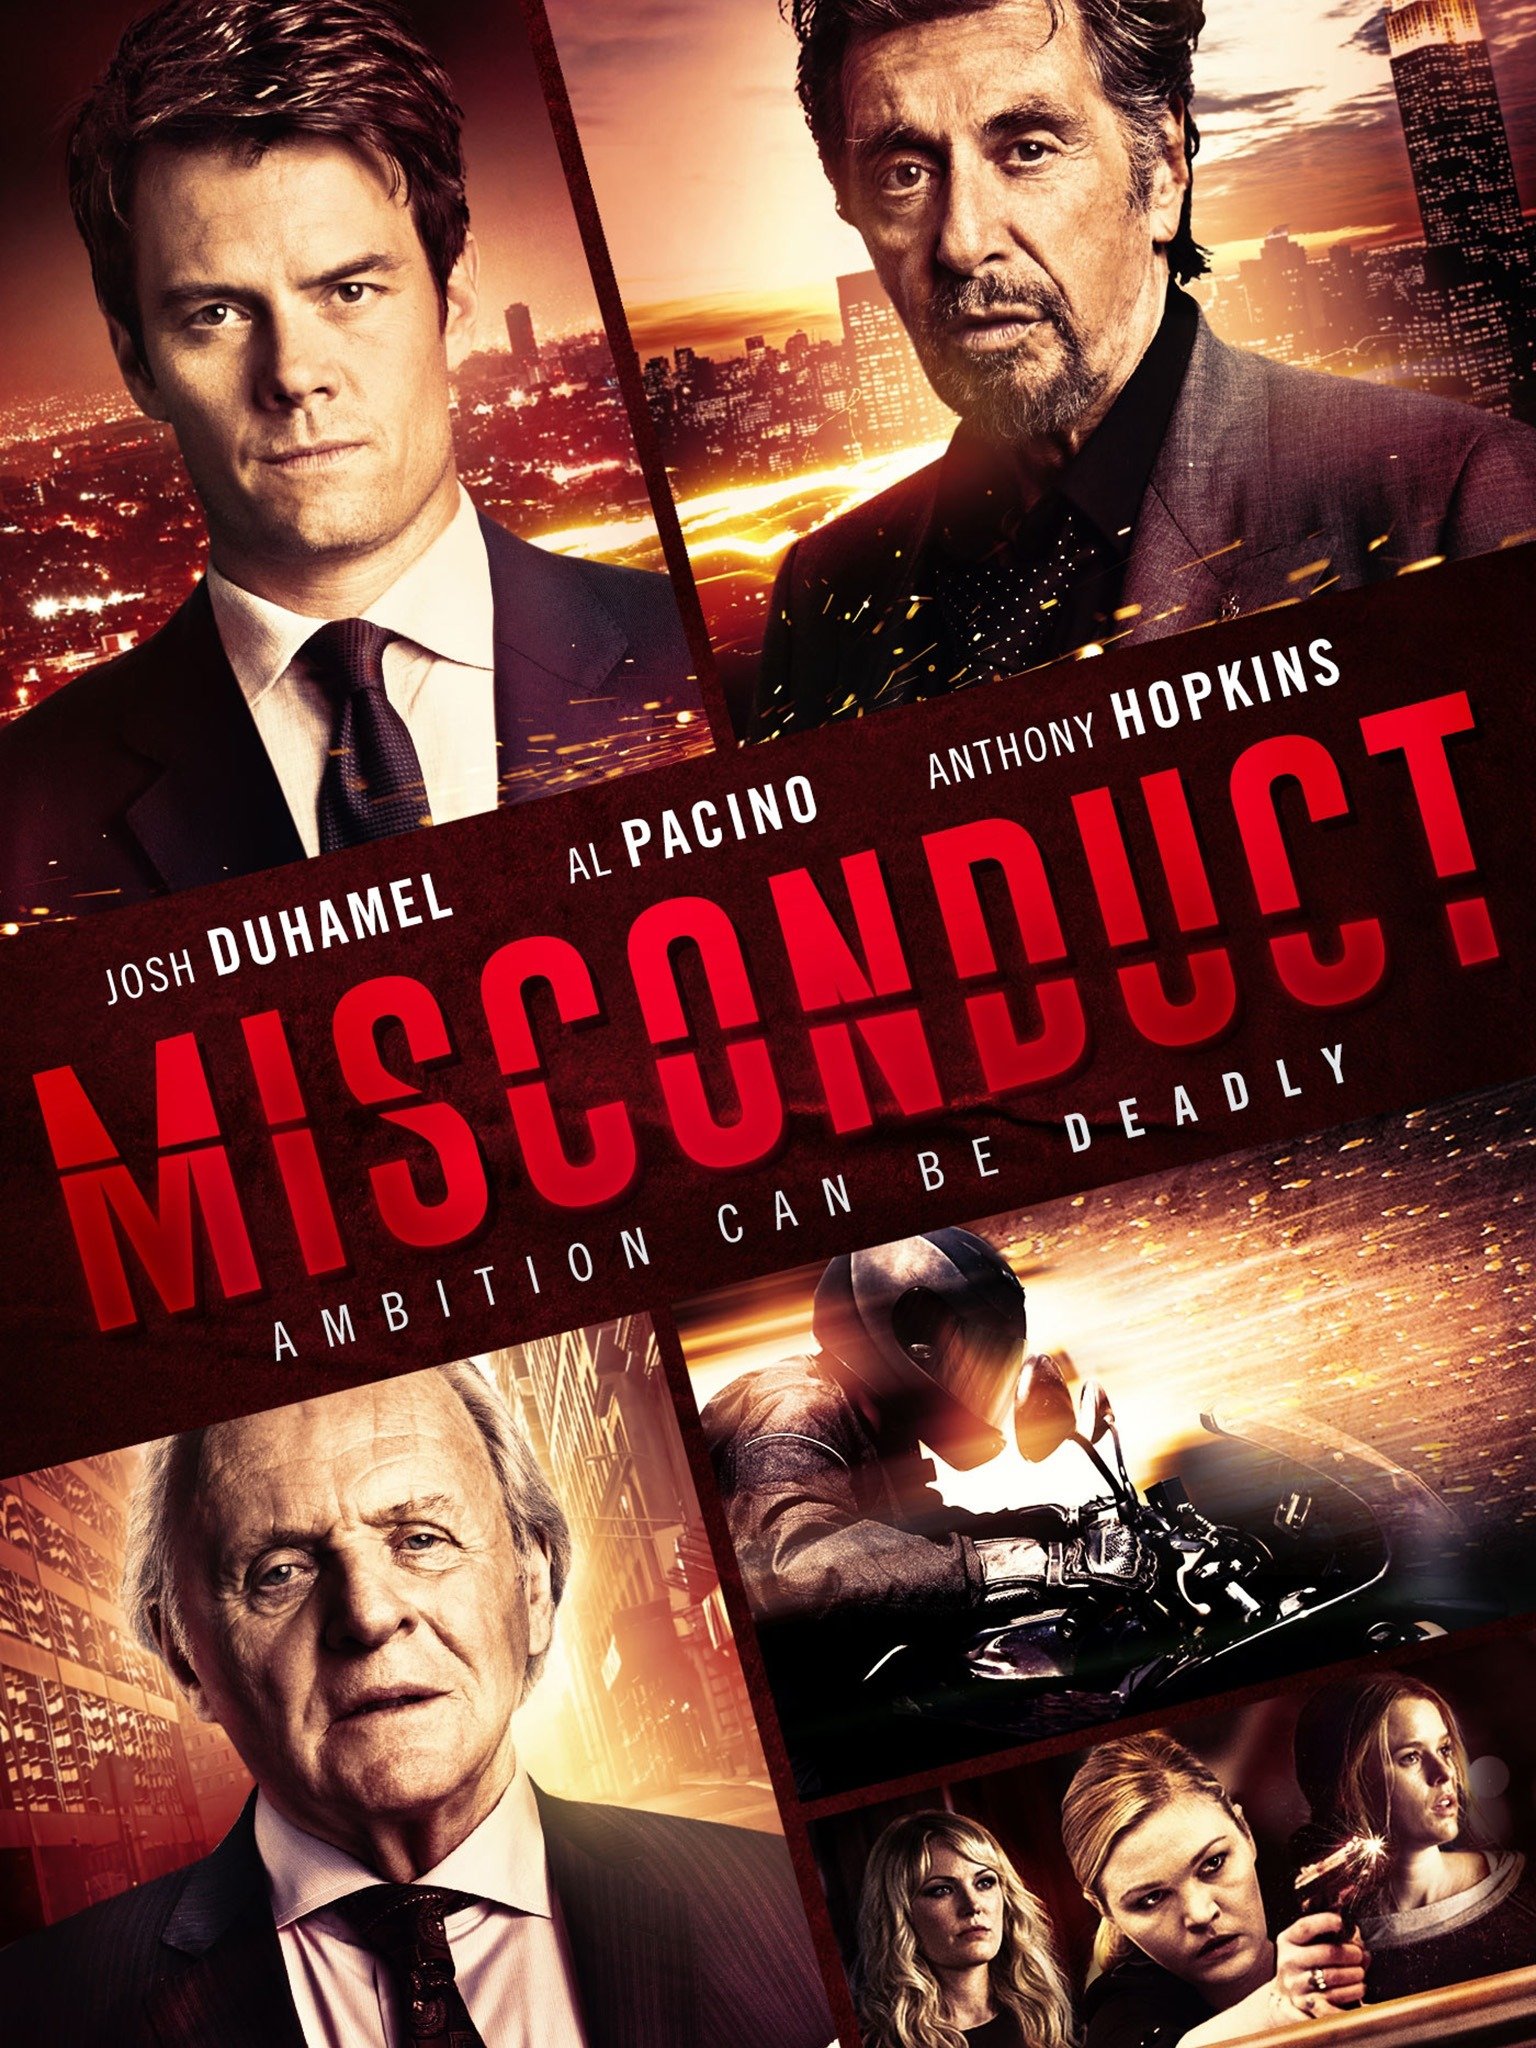 Misconduct: Trailer 1 - Trailers & Videos - Rotten Tomatoes